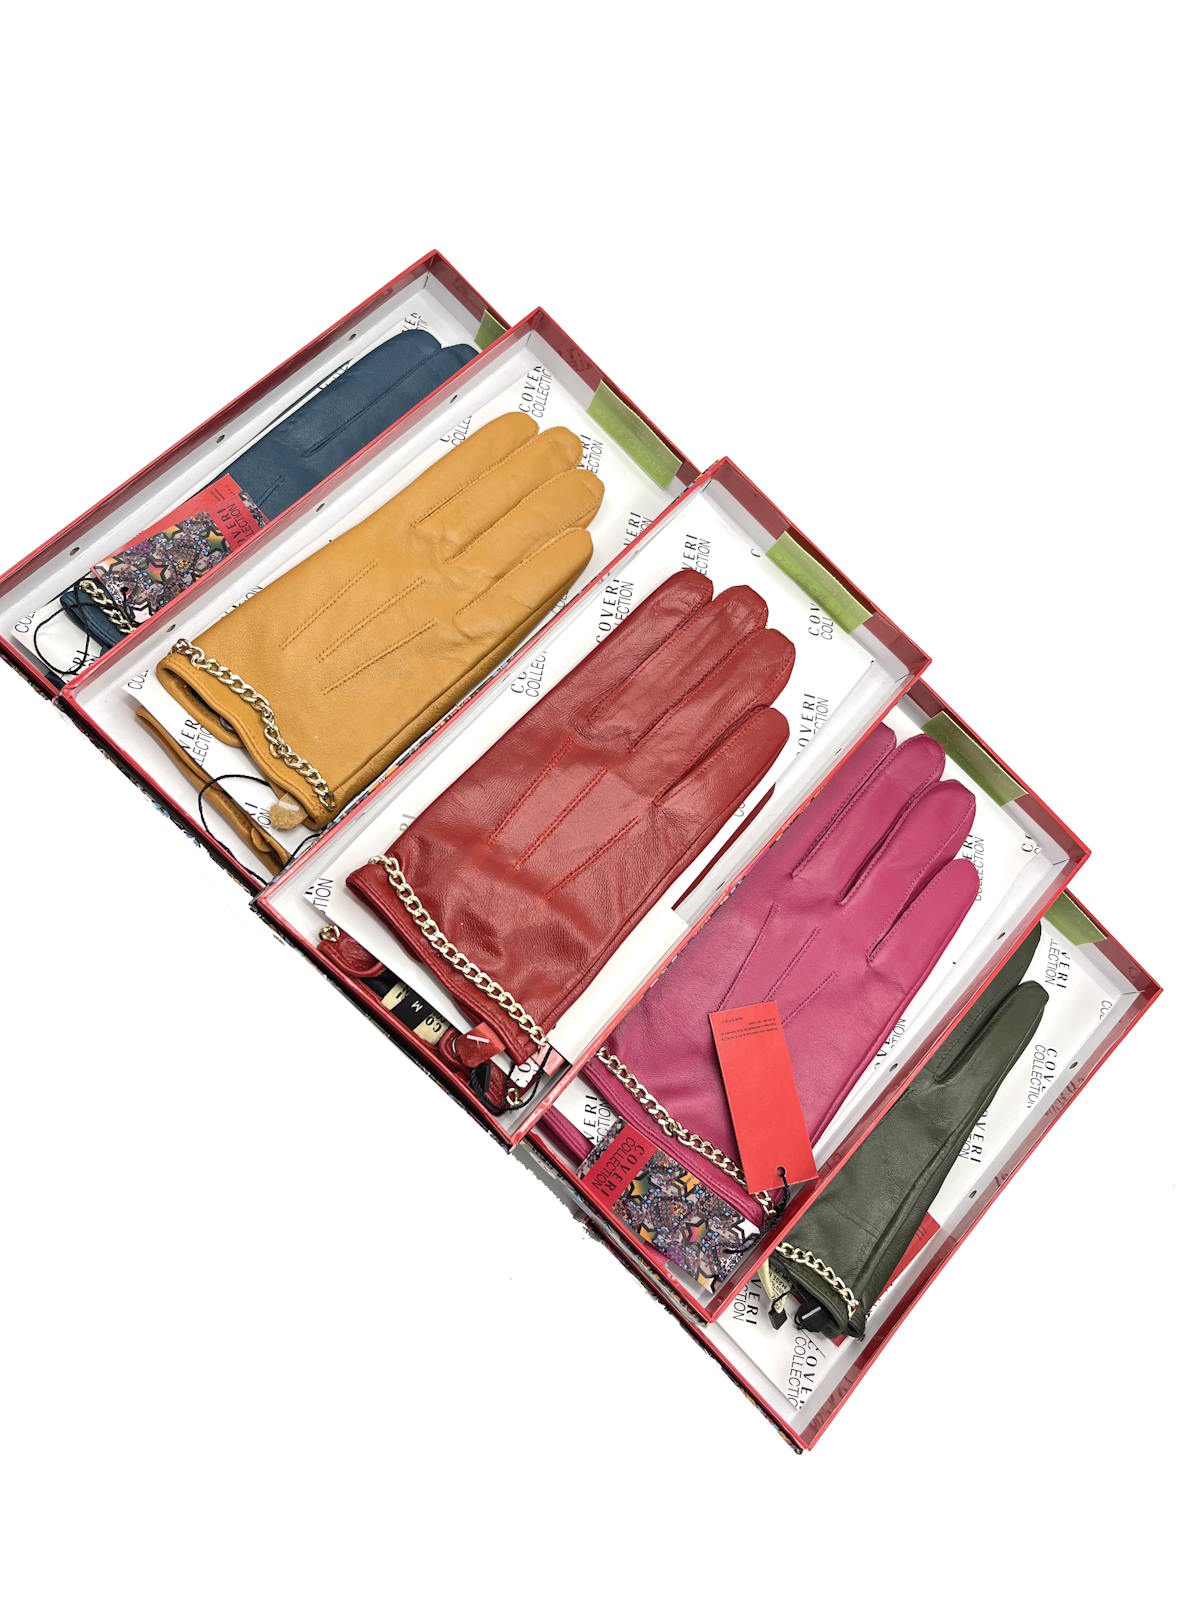 Genuine Leather gloves for women, Coveri Collection gift box, art. 148509